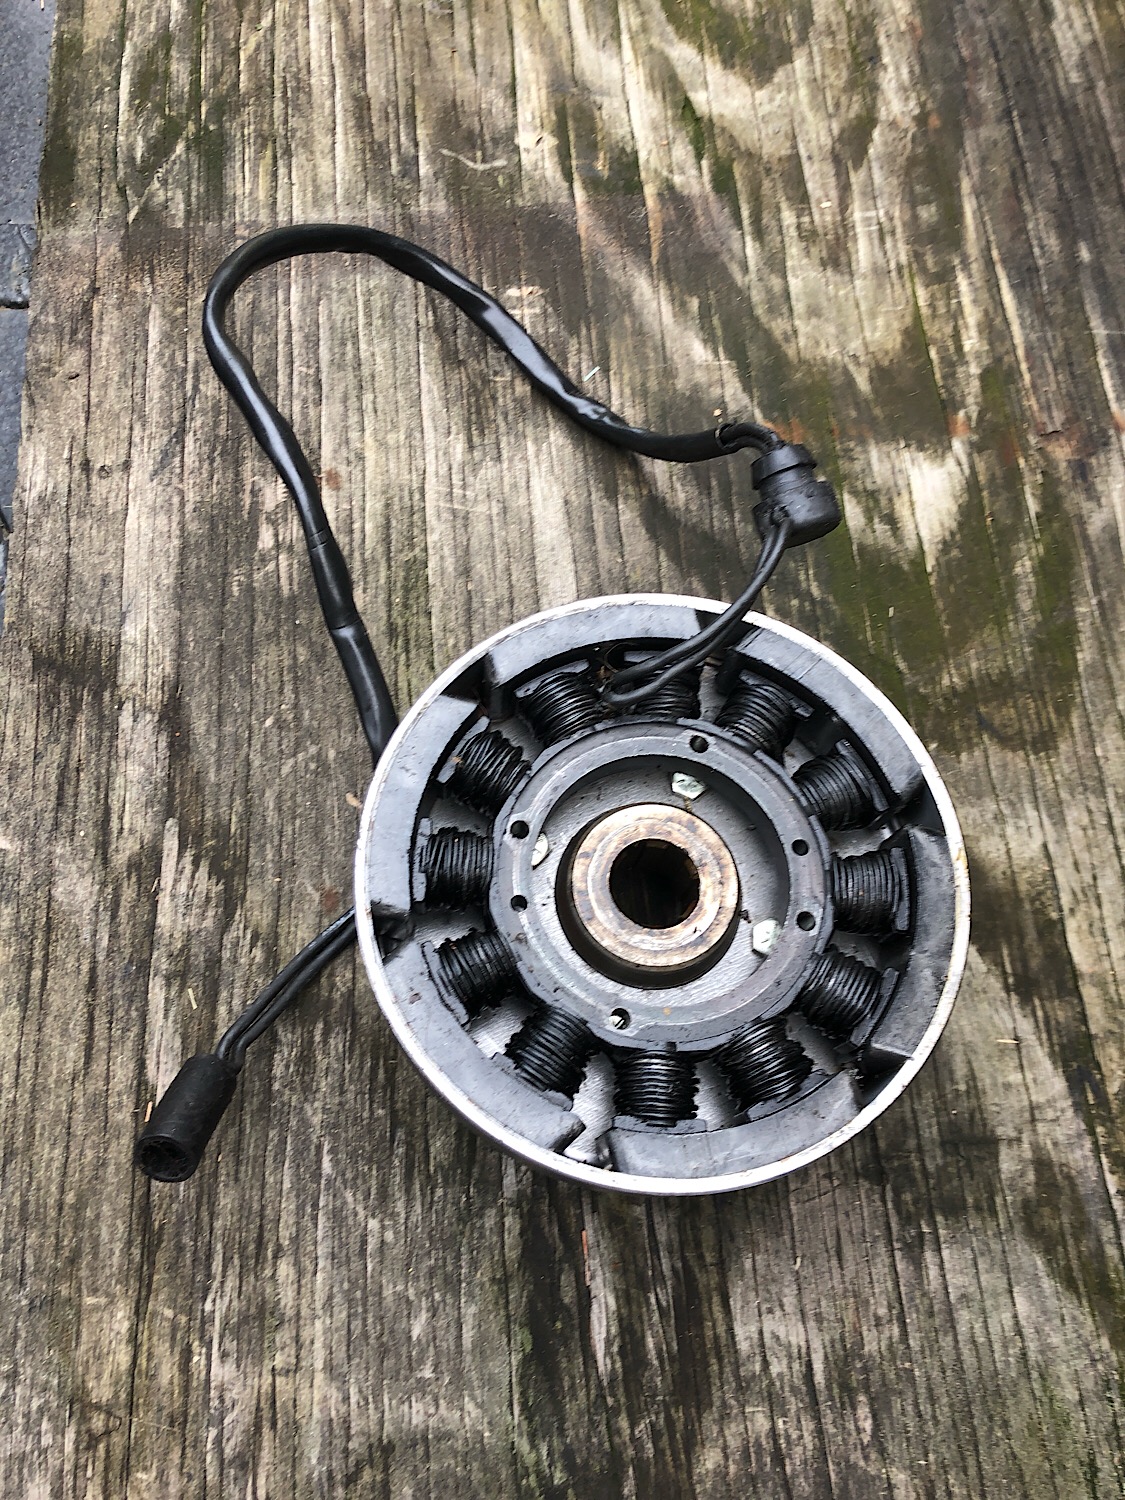 Stator Rotor Assembly $100 Shipped in USA 